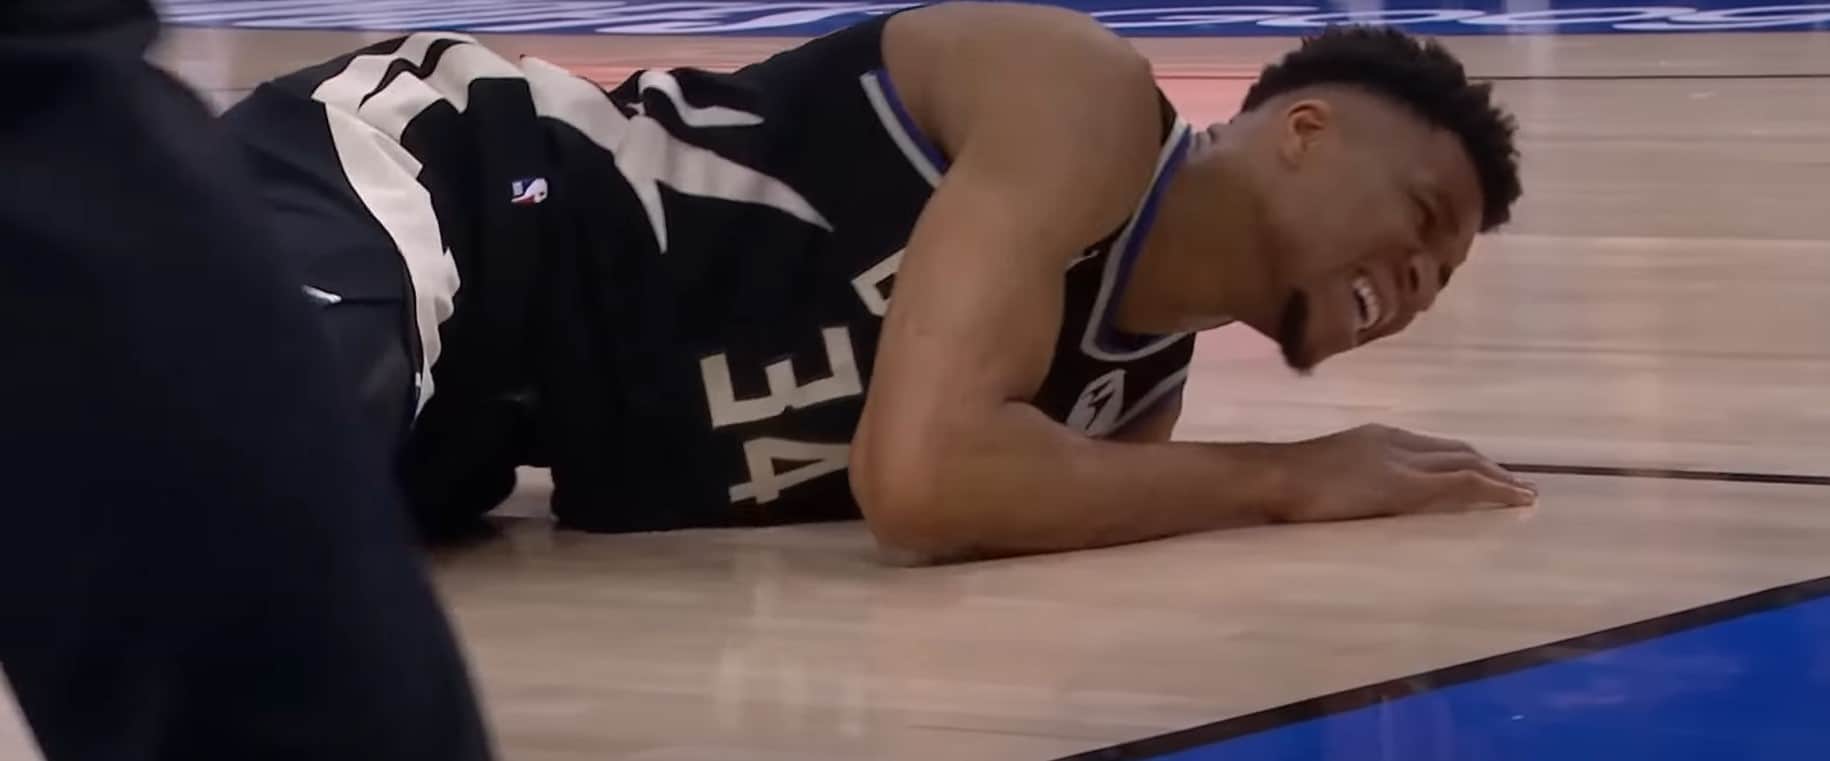 What Happened To Giannis?